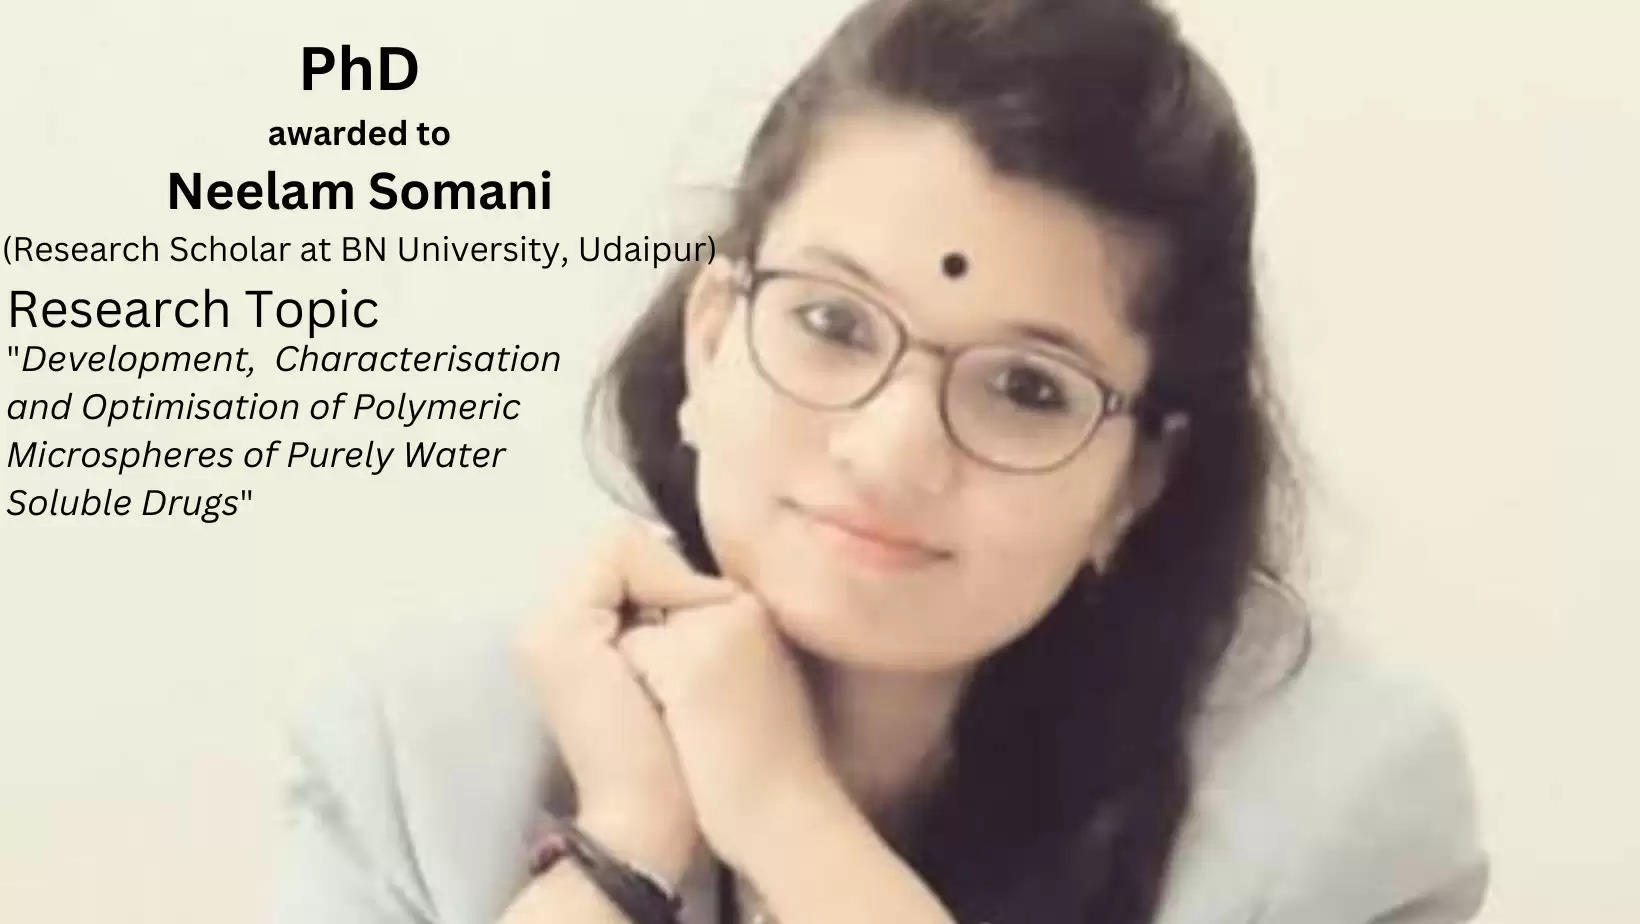 PhD Awarded to Dr Neelam Somani Research Scholar at BN University, Udaipur on Water Soluble Drugs